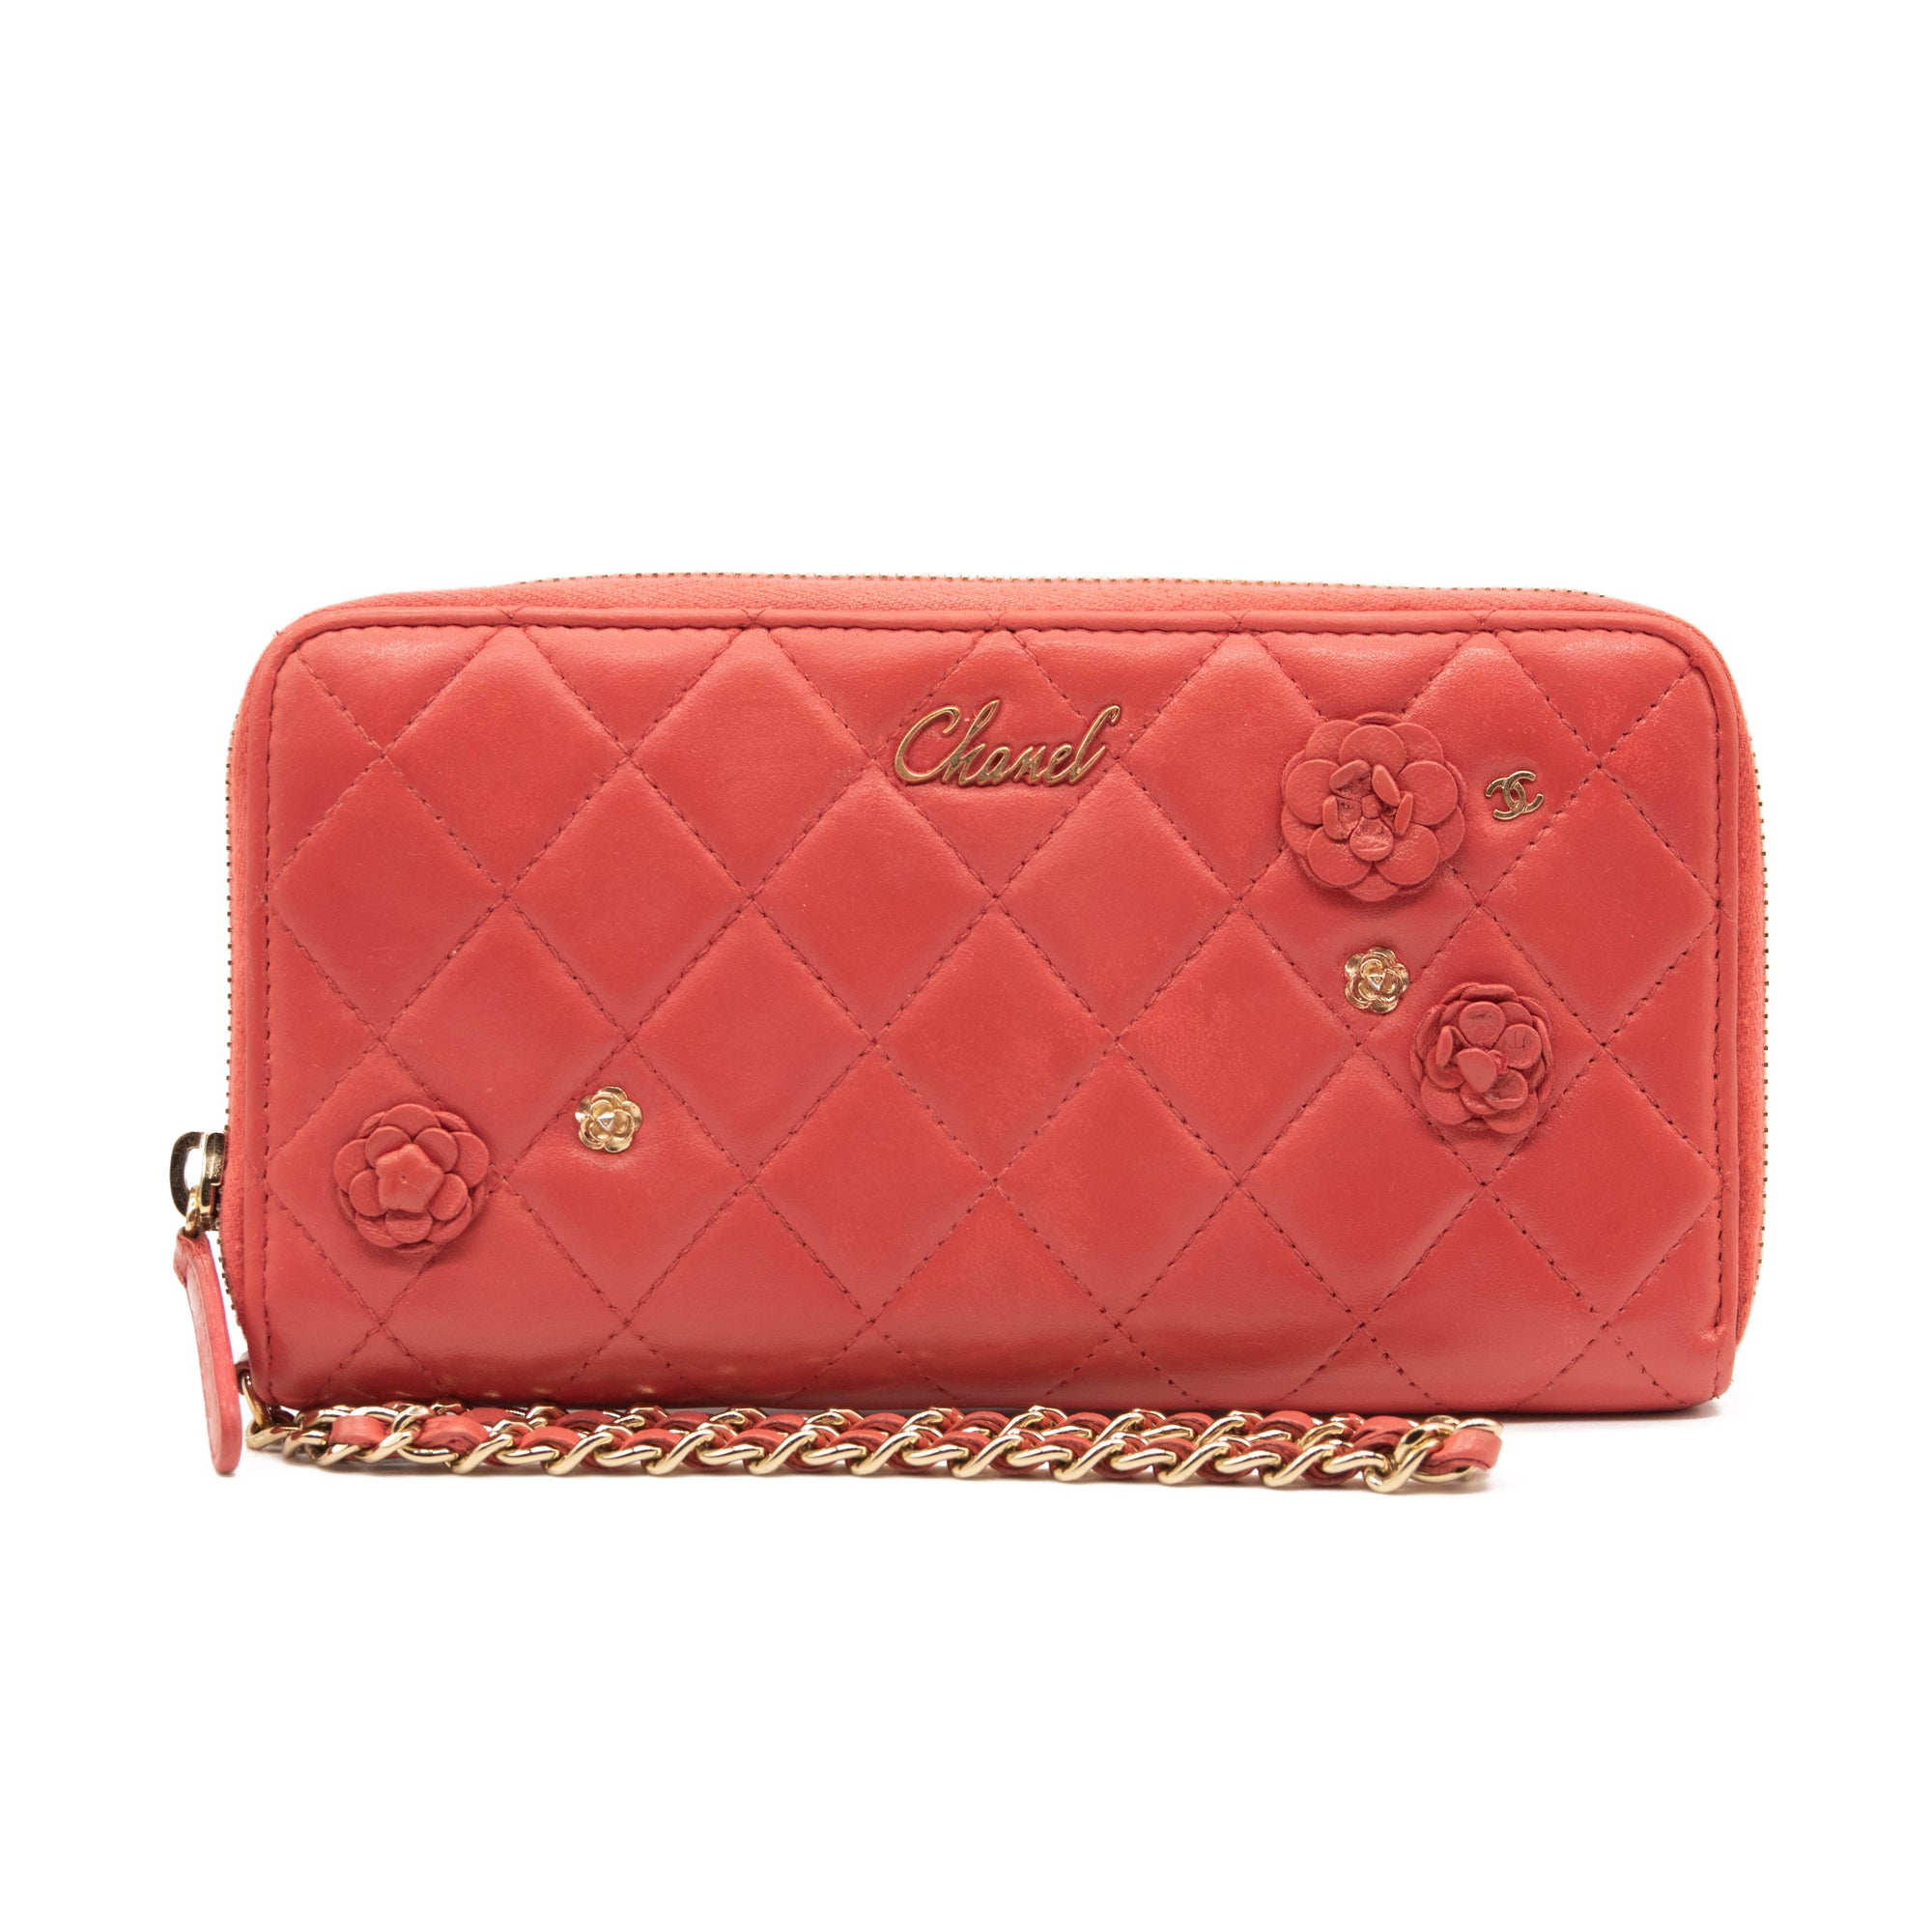 chanel zipped coin purse pink